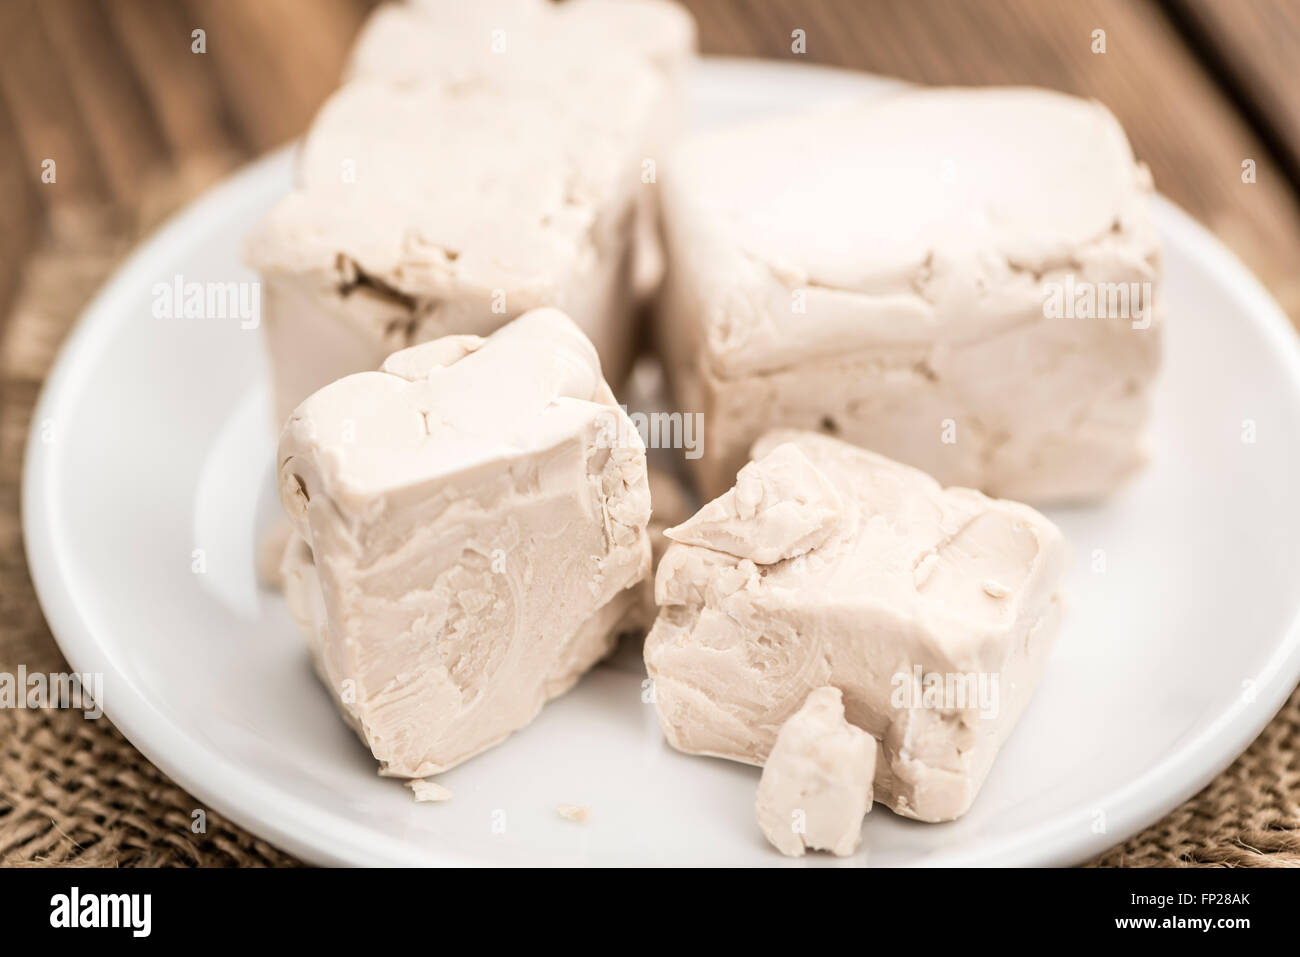 Portion of fresh Yeast (selective focus) on wooden background Stock Photo